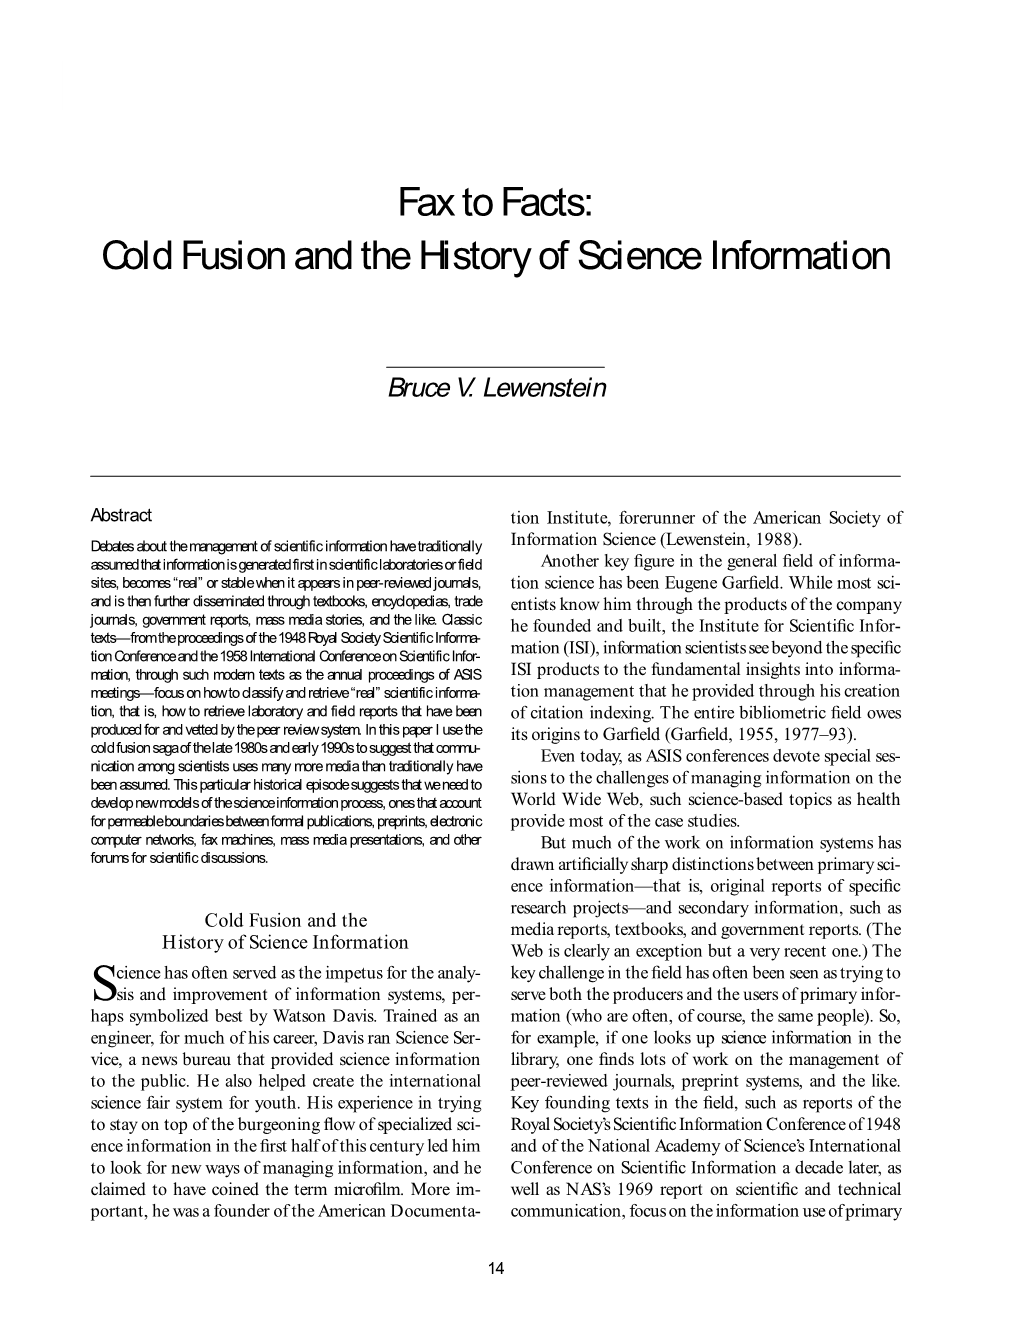 Fax to Facts: Cold Fusion and the History of Science Information